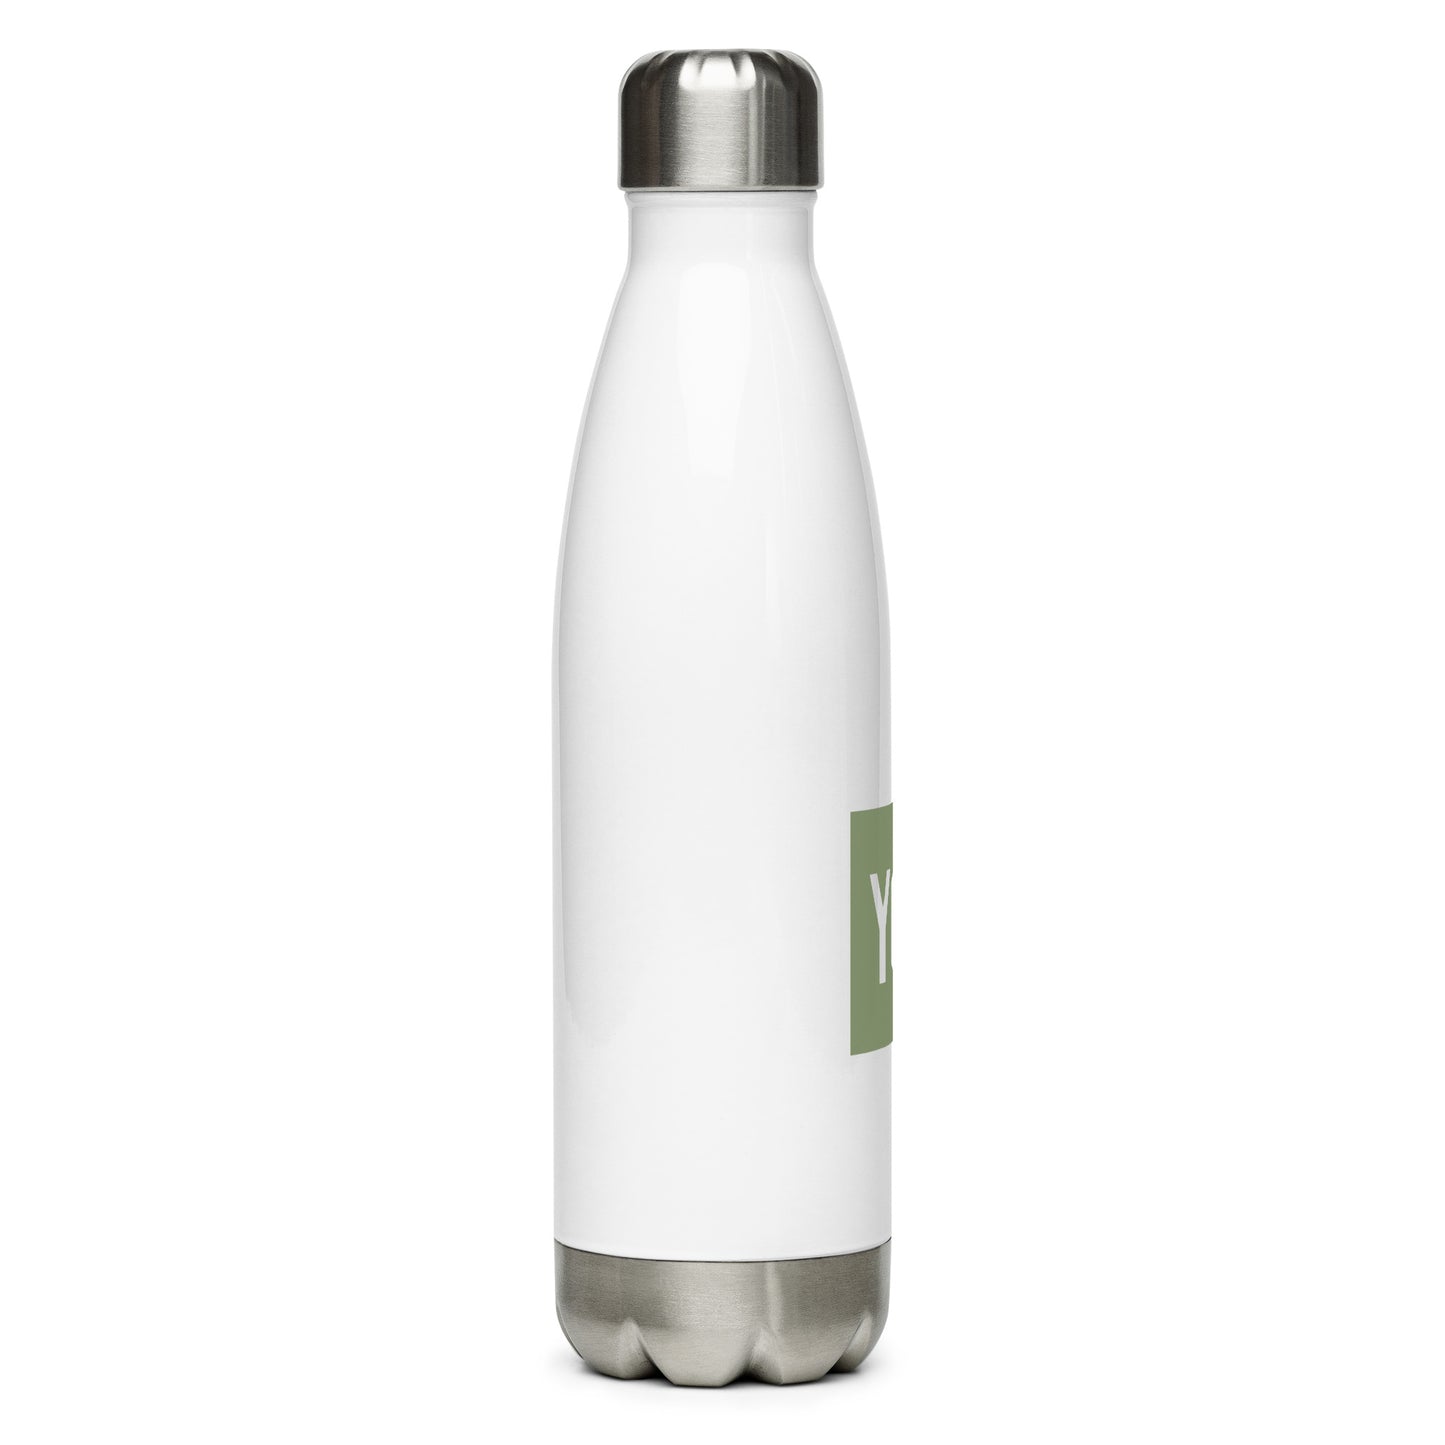 Aviation Gift Water Bottle - Camo Green • YQB Quebec City • YHM Designs - Image 07